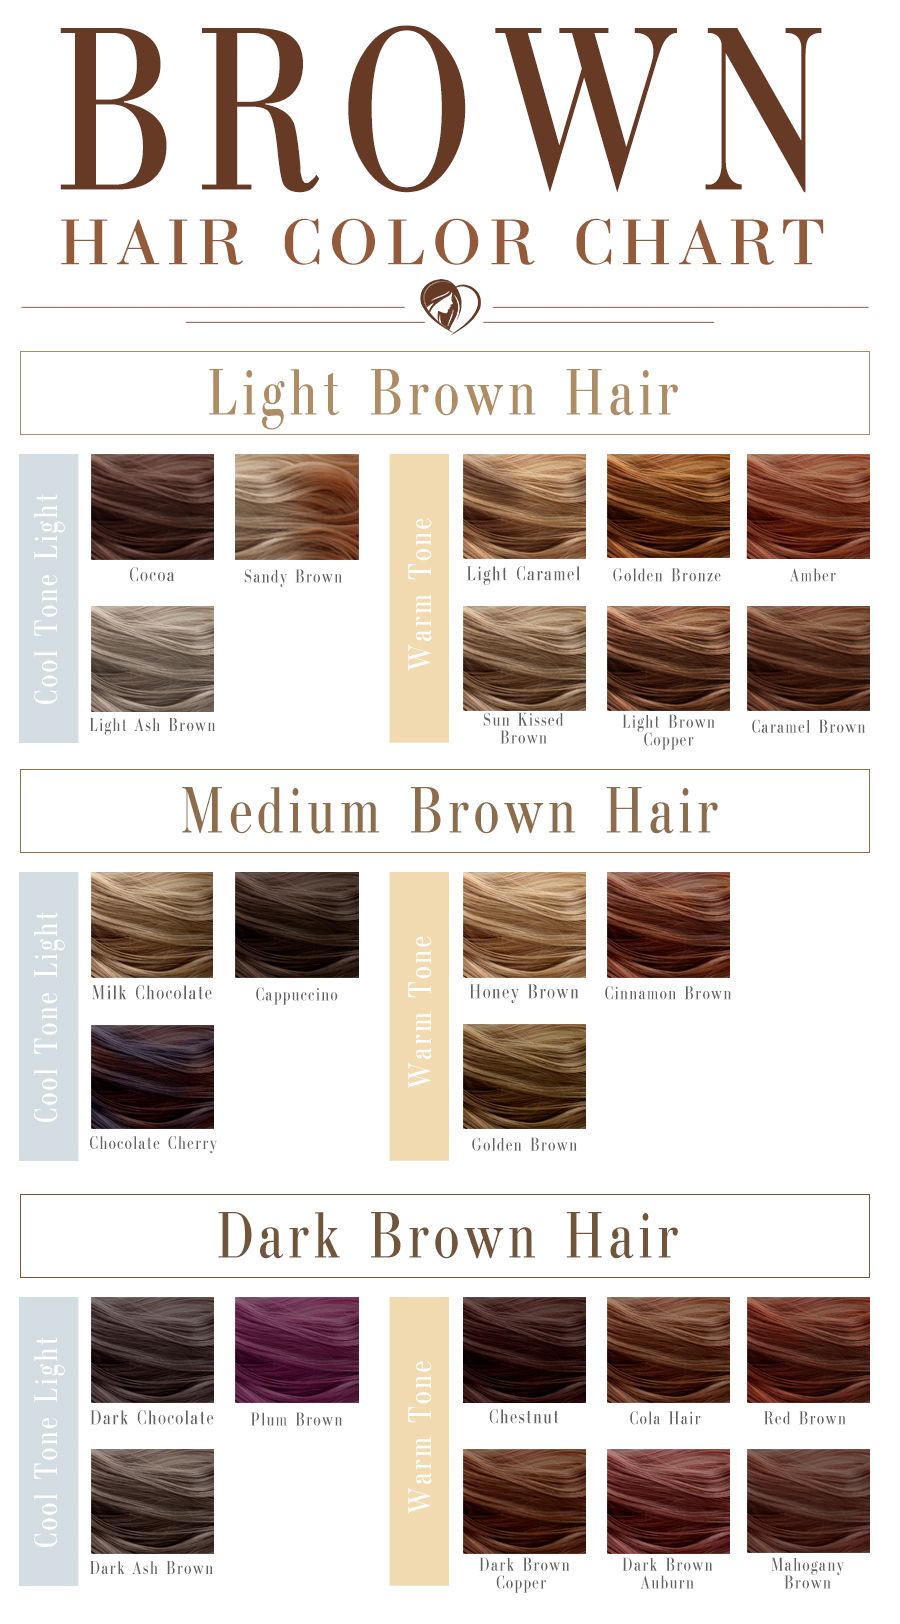 What Shade Of Brown Hair Color Chart Is The Best For You #brunette #brownhair